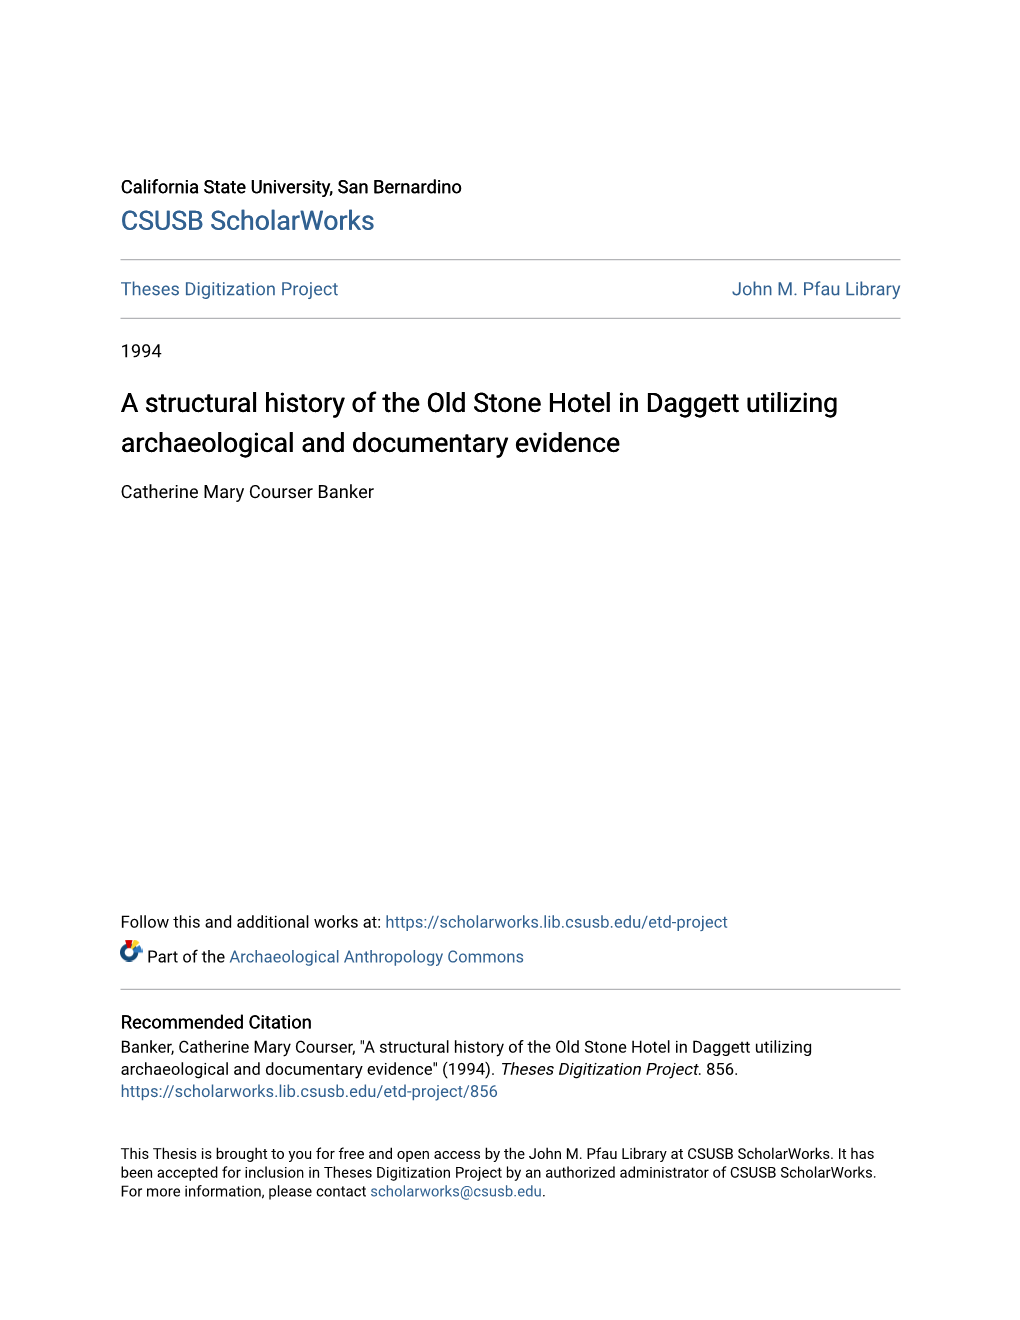 A Structural History of the Old Stone Hotel in Daggett Utilizing Archaeological and Documentary Evidence